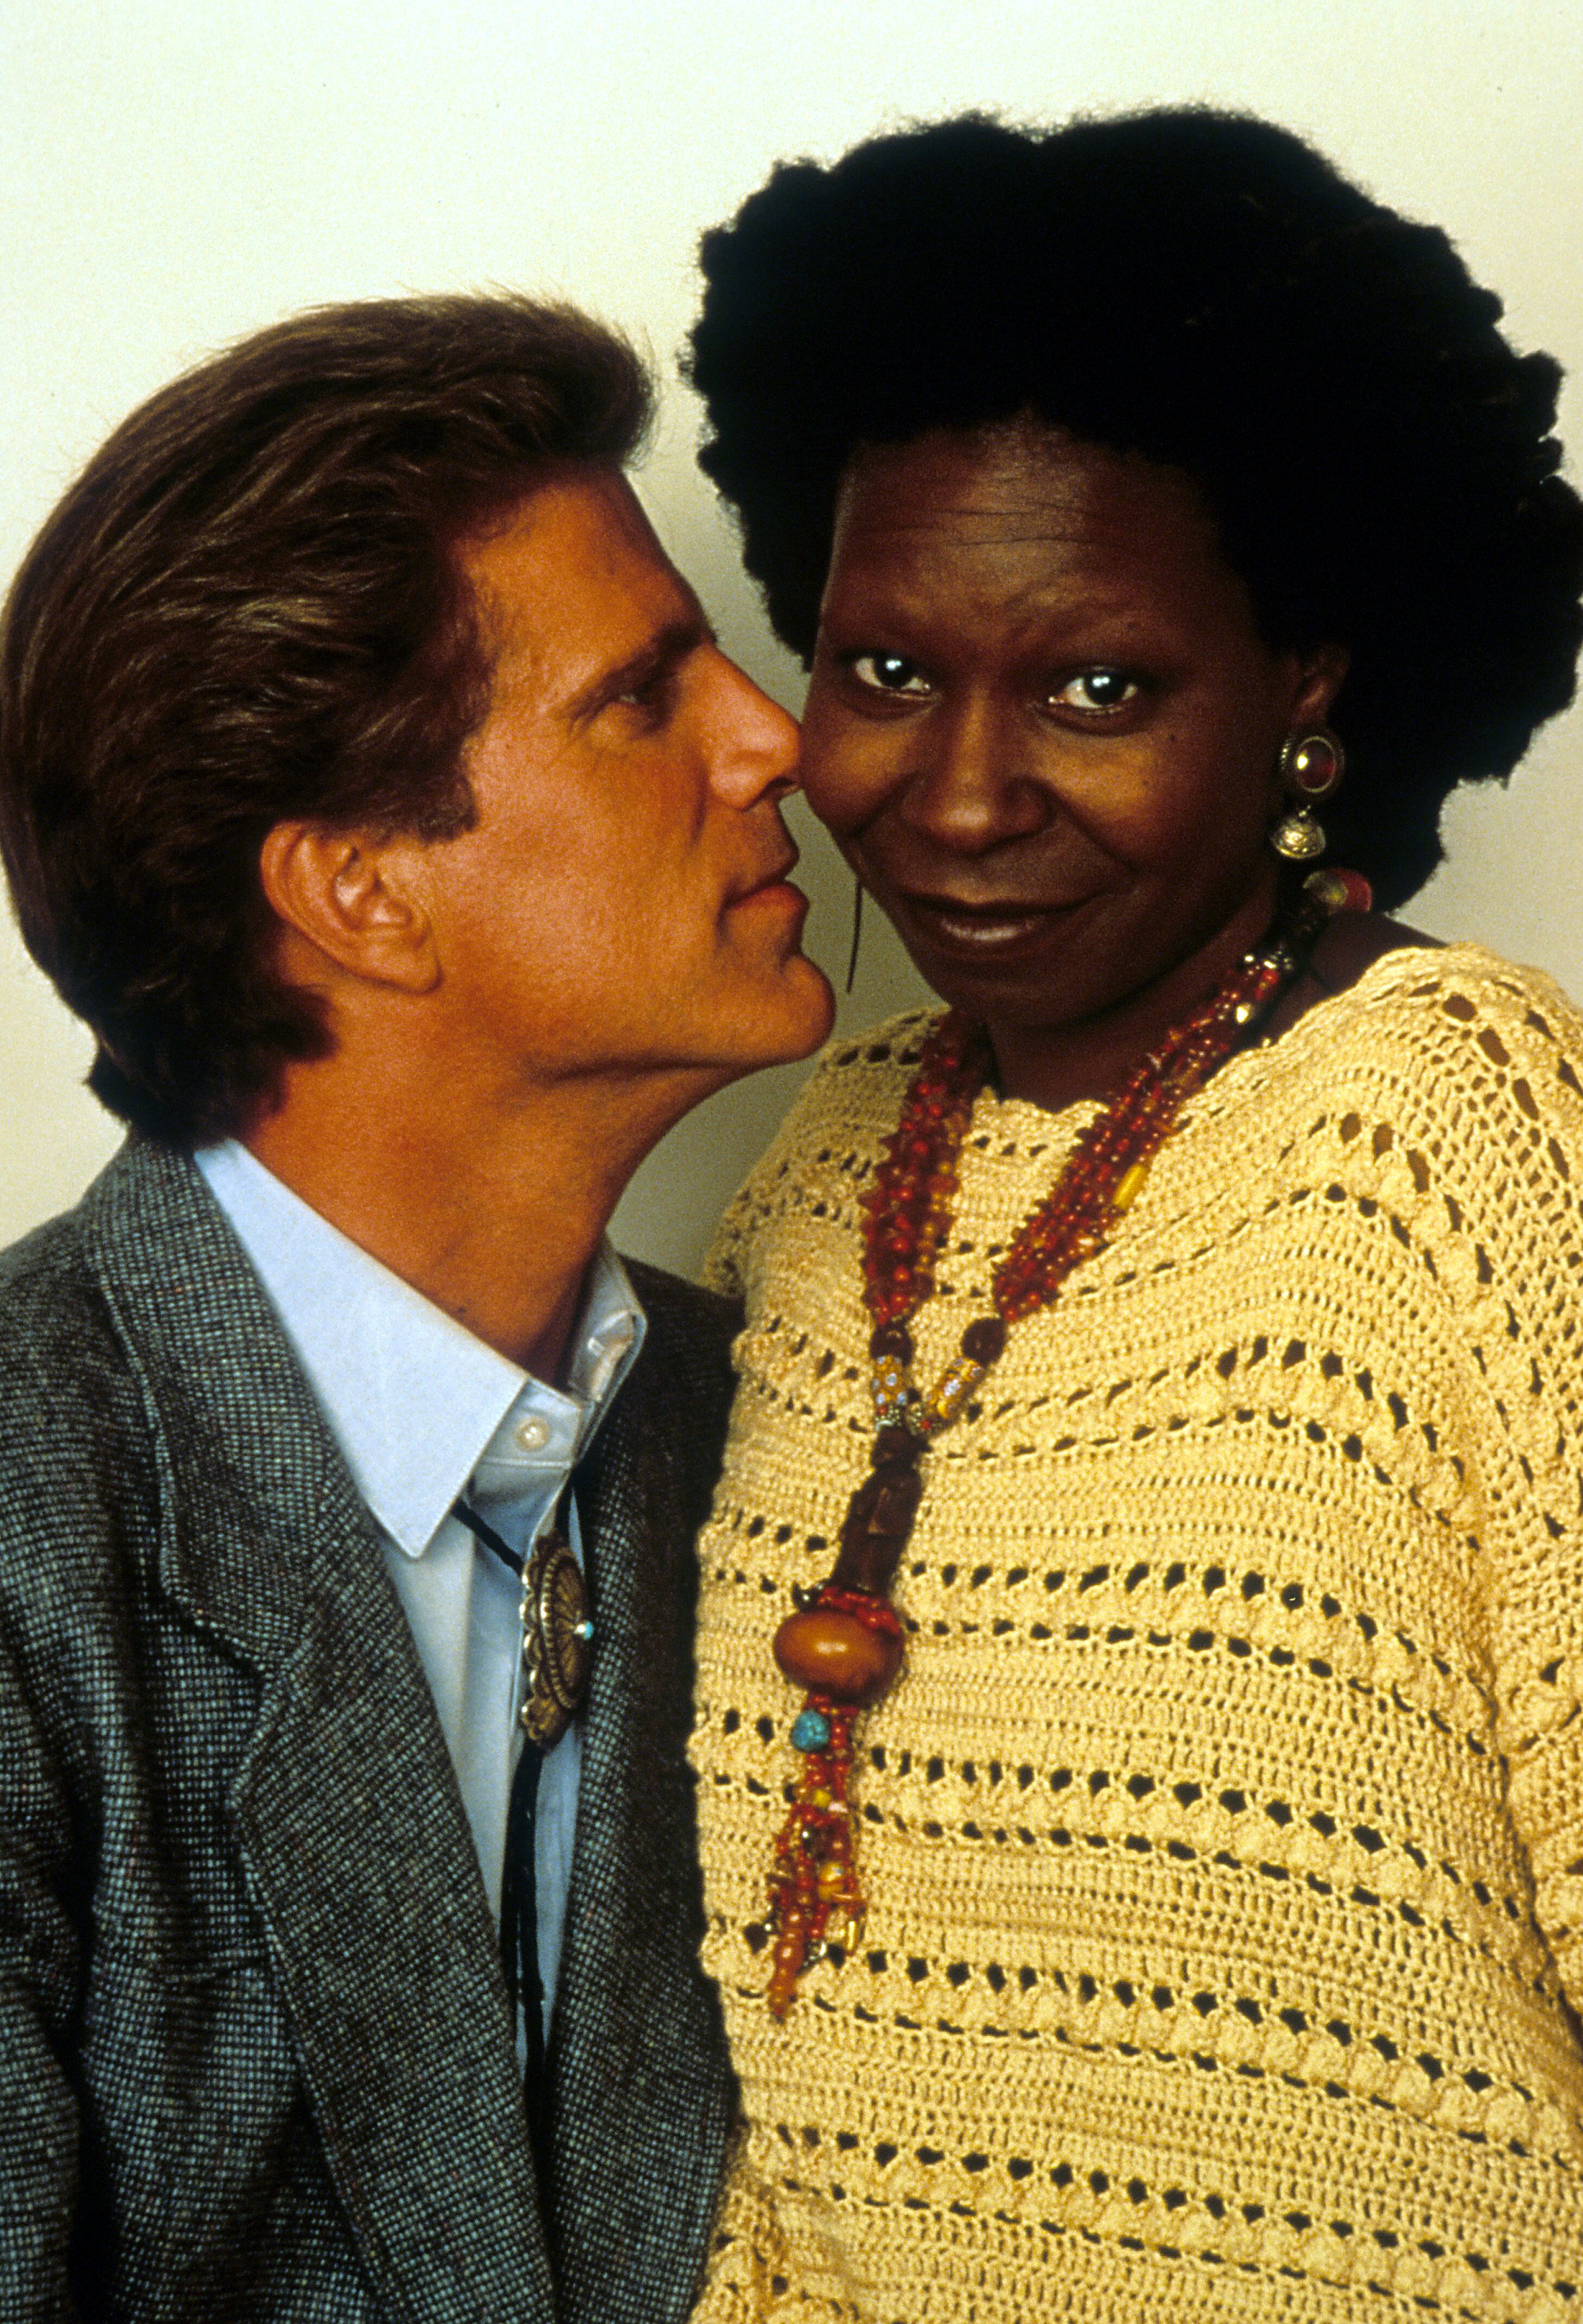 Whoopi Goldberg not amused by Ted Danson's face right up next to her in a scene from the film 'Made In America', 1993. | Source: Getty Images